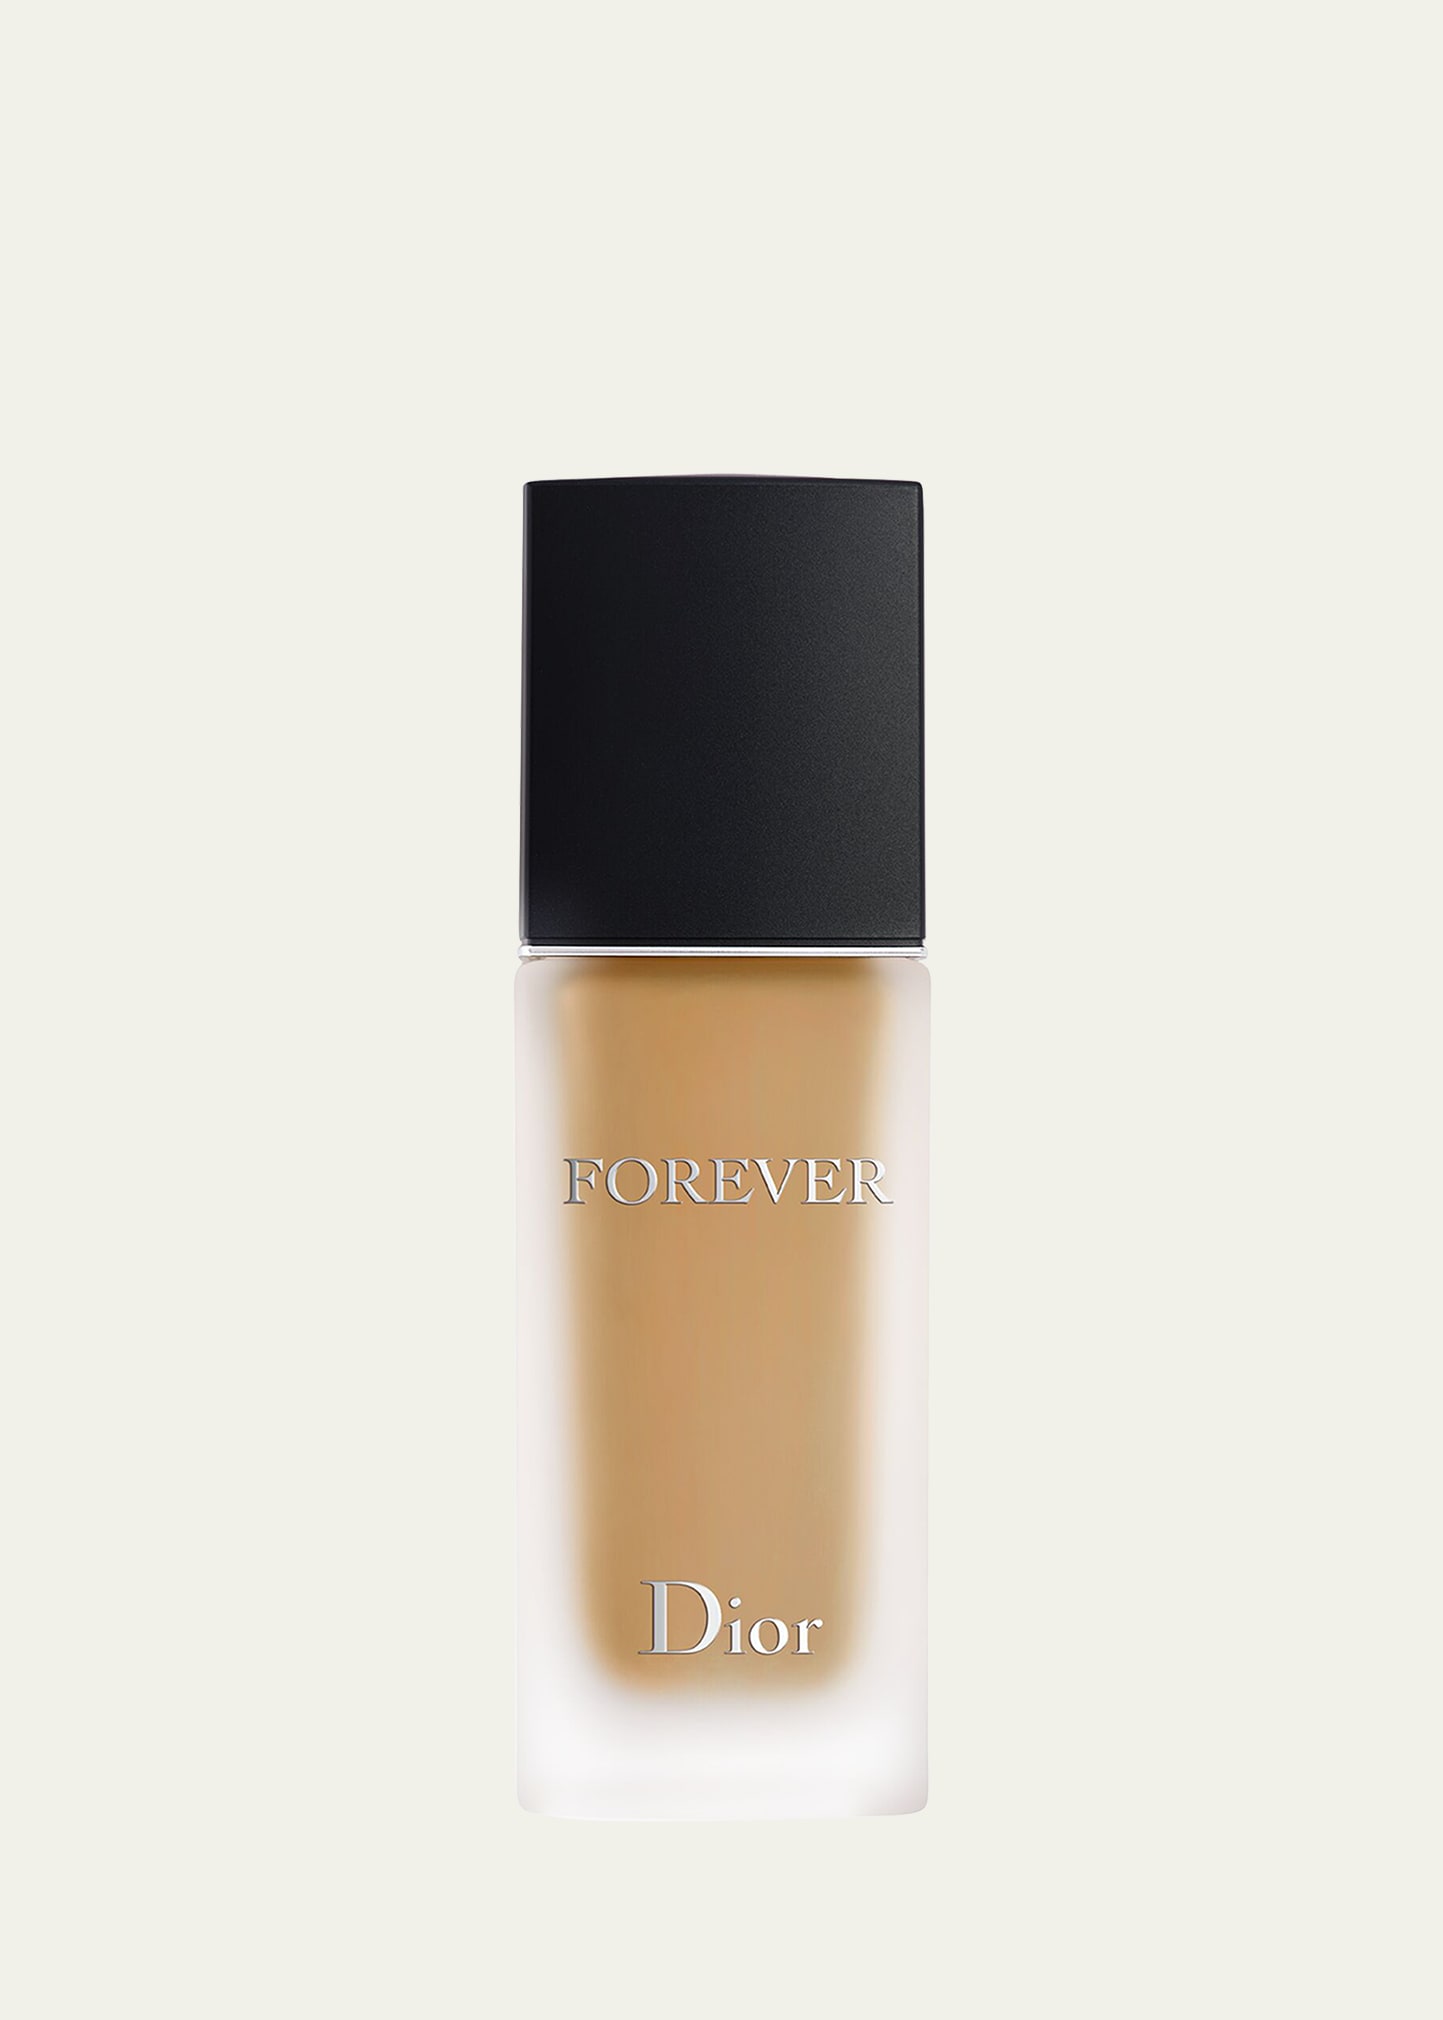 Dior Forever Matte Foundation Spf 15, 1 Oz. In 0 Cool Rosy